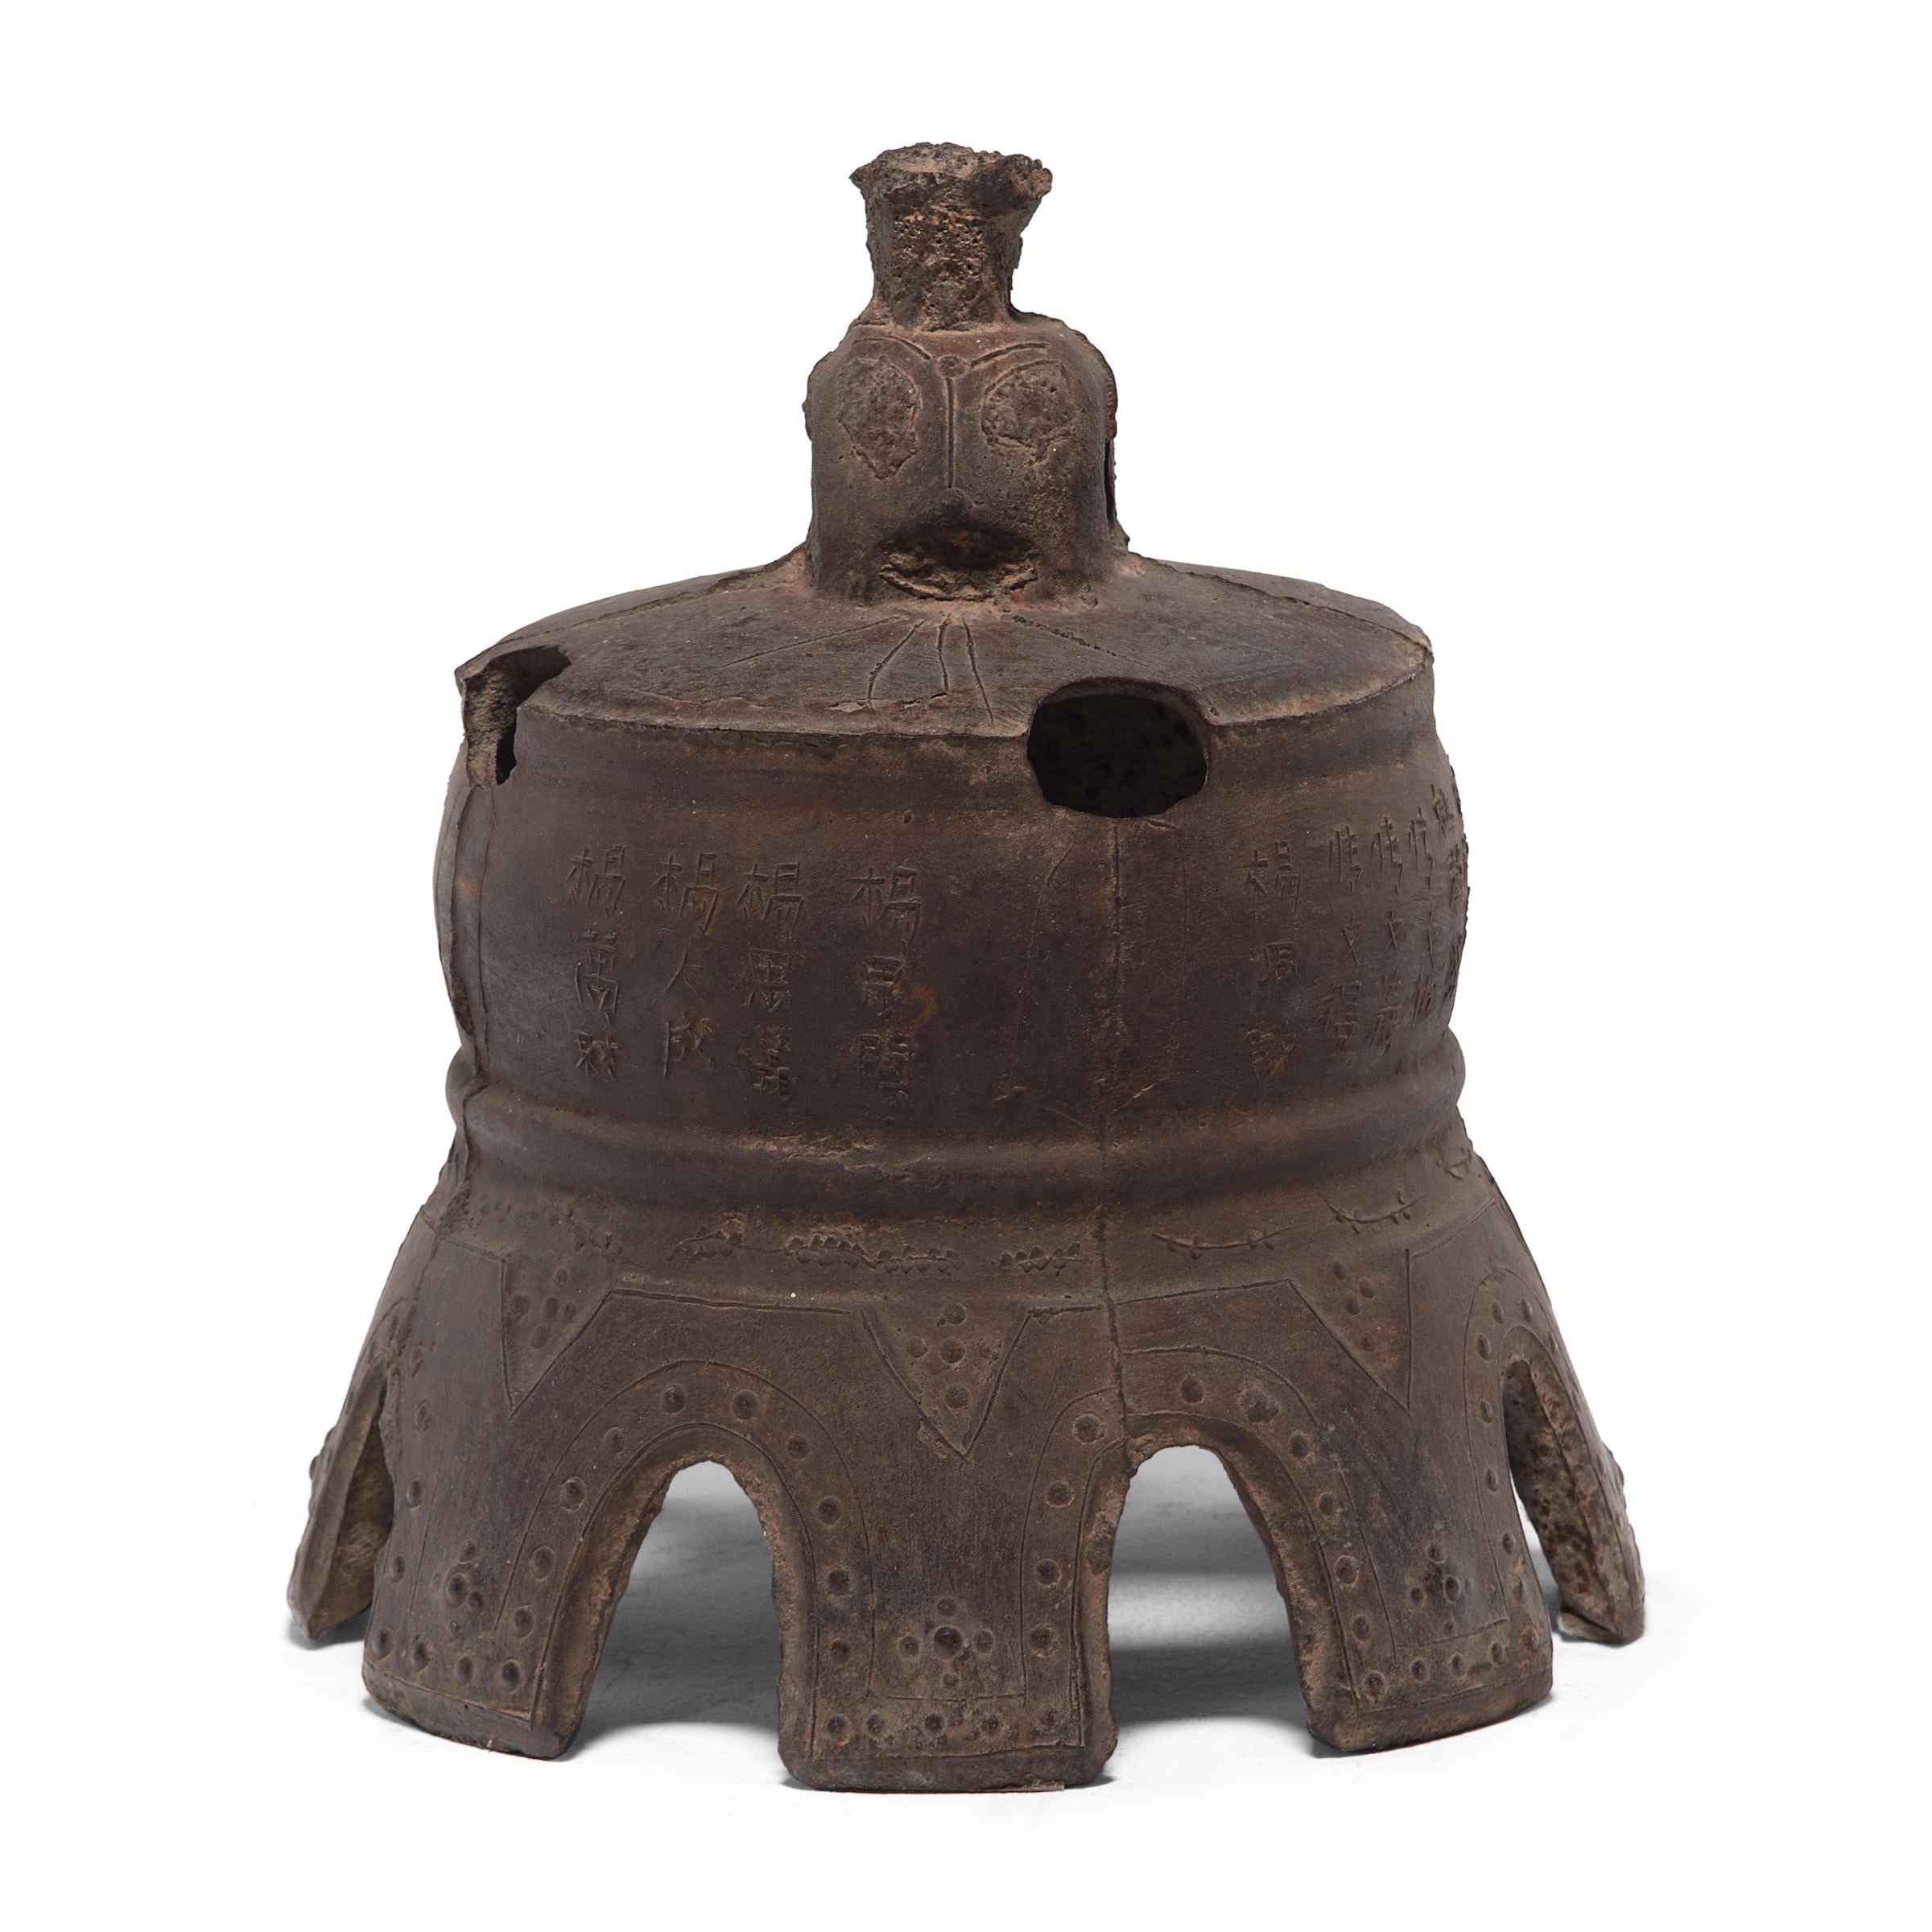 This lovely Qing-dynasty bell once pealed in a Chinese village, sounding out in celebration or giving notice of important events. Expertly forged, the cast-iron bell is detailed with characters in intricate relief, and its exaggerated scallop rim is